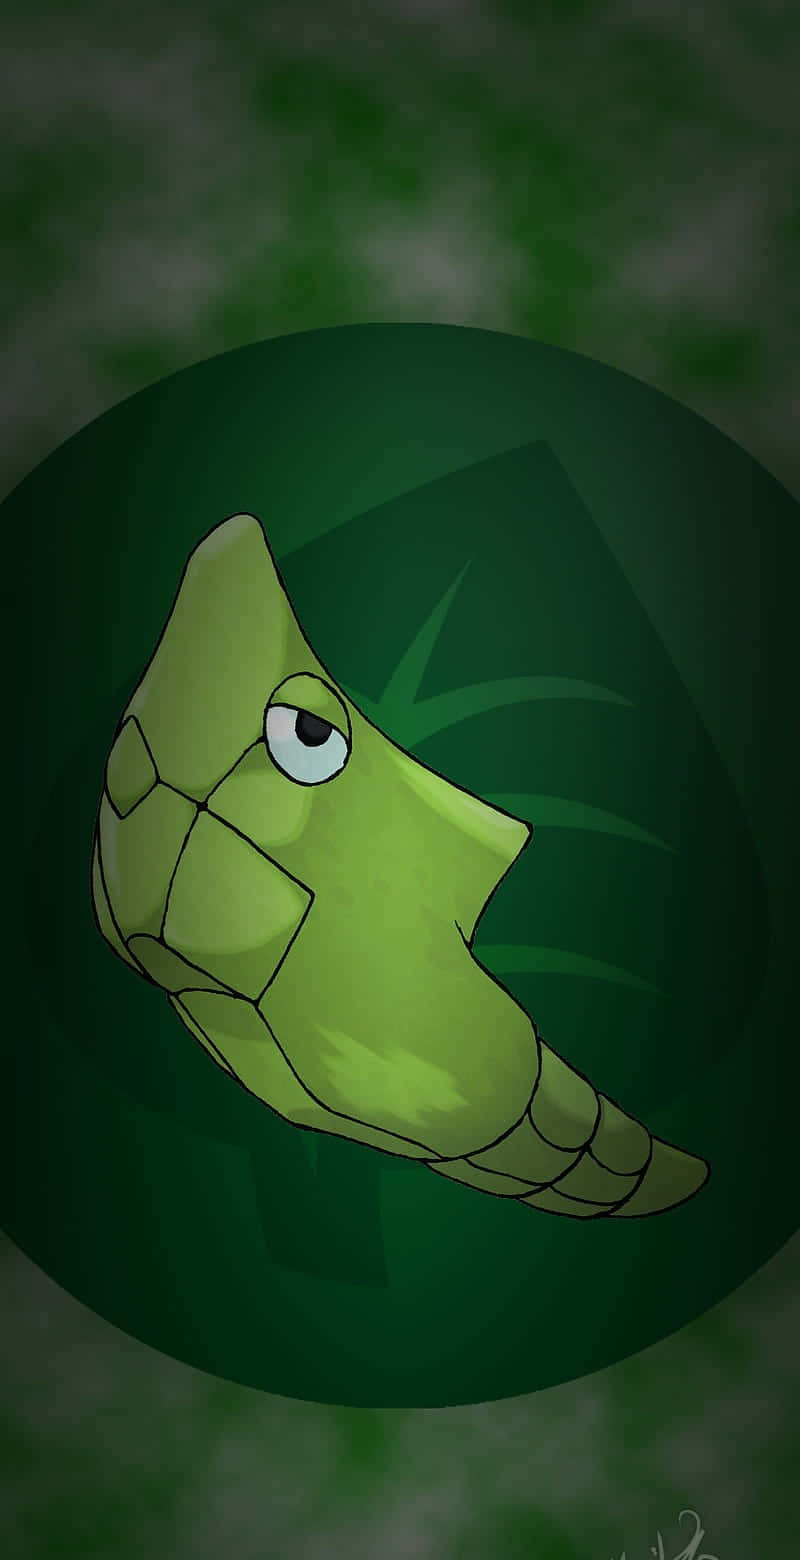 Green Leaf With Metapod Phone Wallpaper